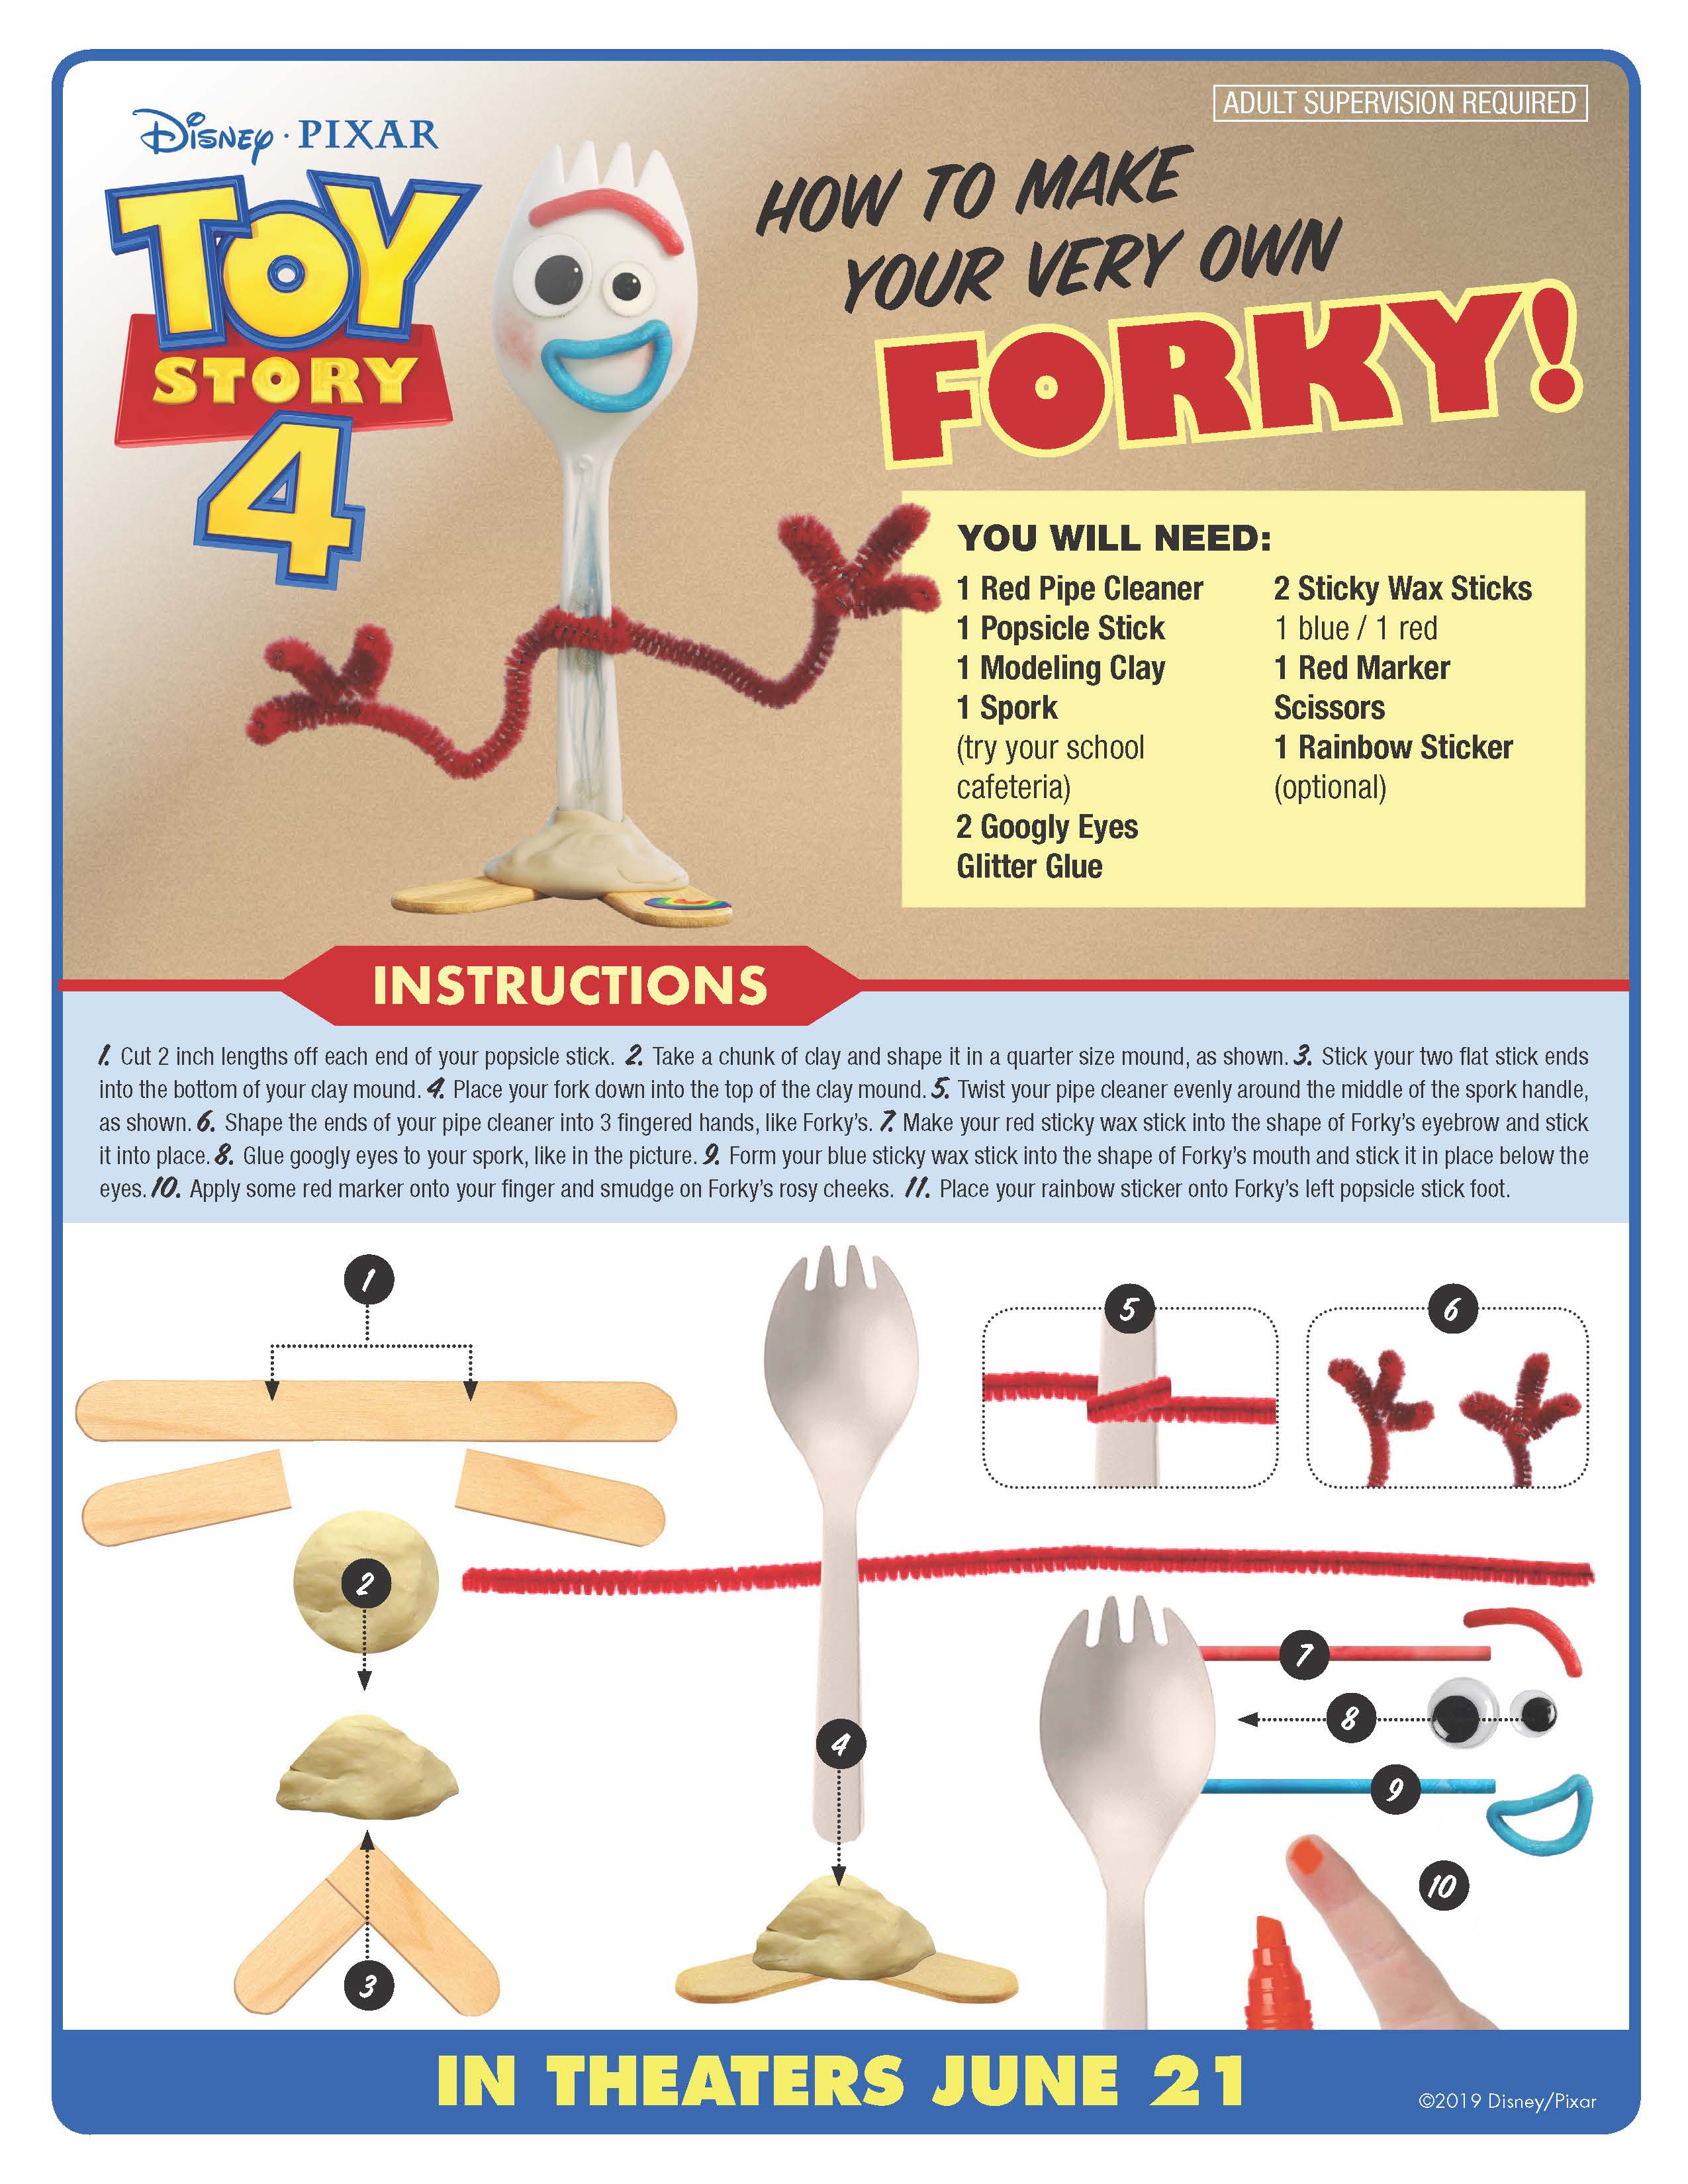 How to Make Your Own Forky from Toy Story #disney #craft #disneycraft #forky #toystory #toystory4